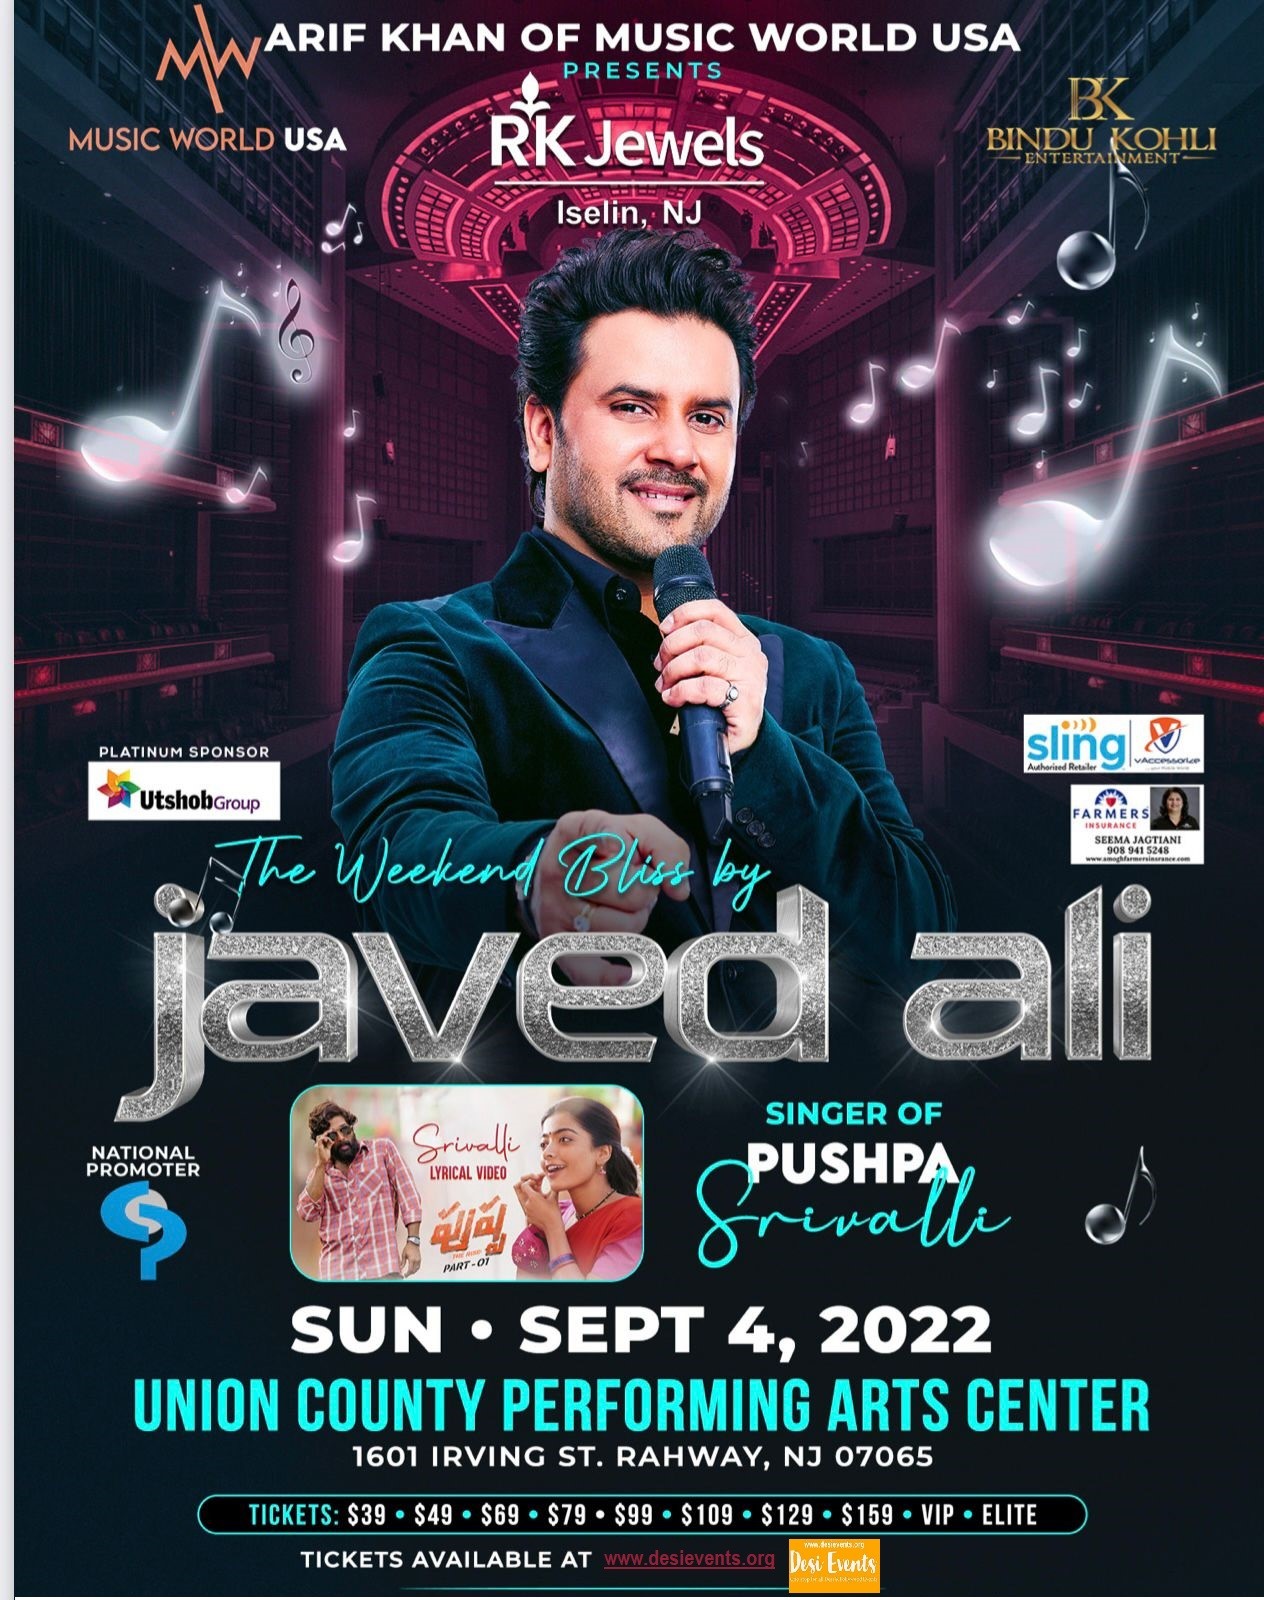 Javed Ali Live Concert Union County Center NJ 2022 September, 4, 2022 AT UNION COUNTY PERFORMING ART CENTER 1601 IRVING ST. RA on Sep 04, 19:00@Union county center - Buy tickets and Get information on Desi Events desievents.org